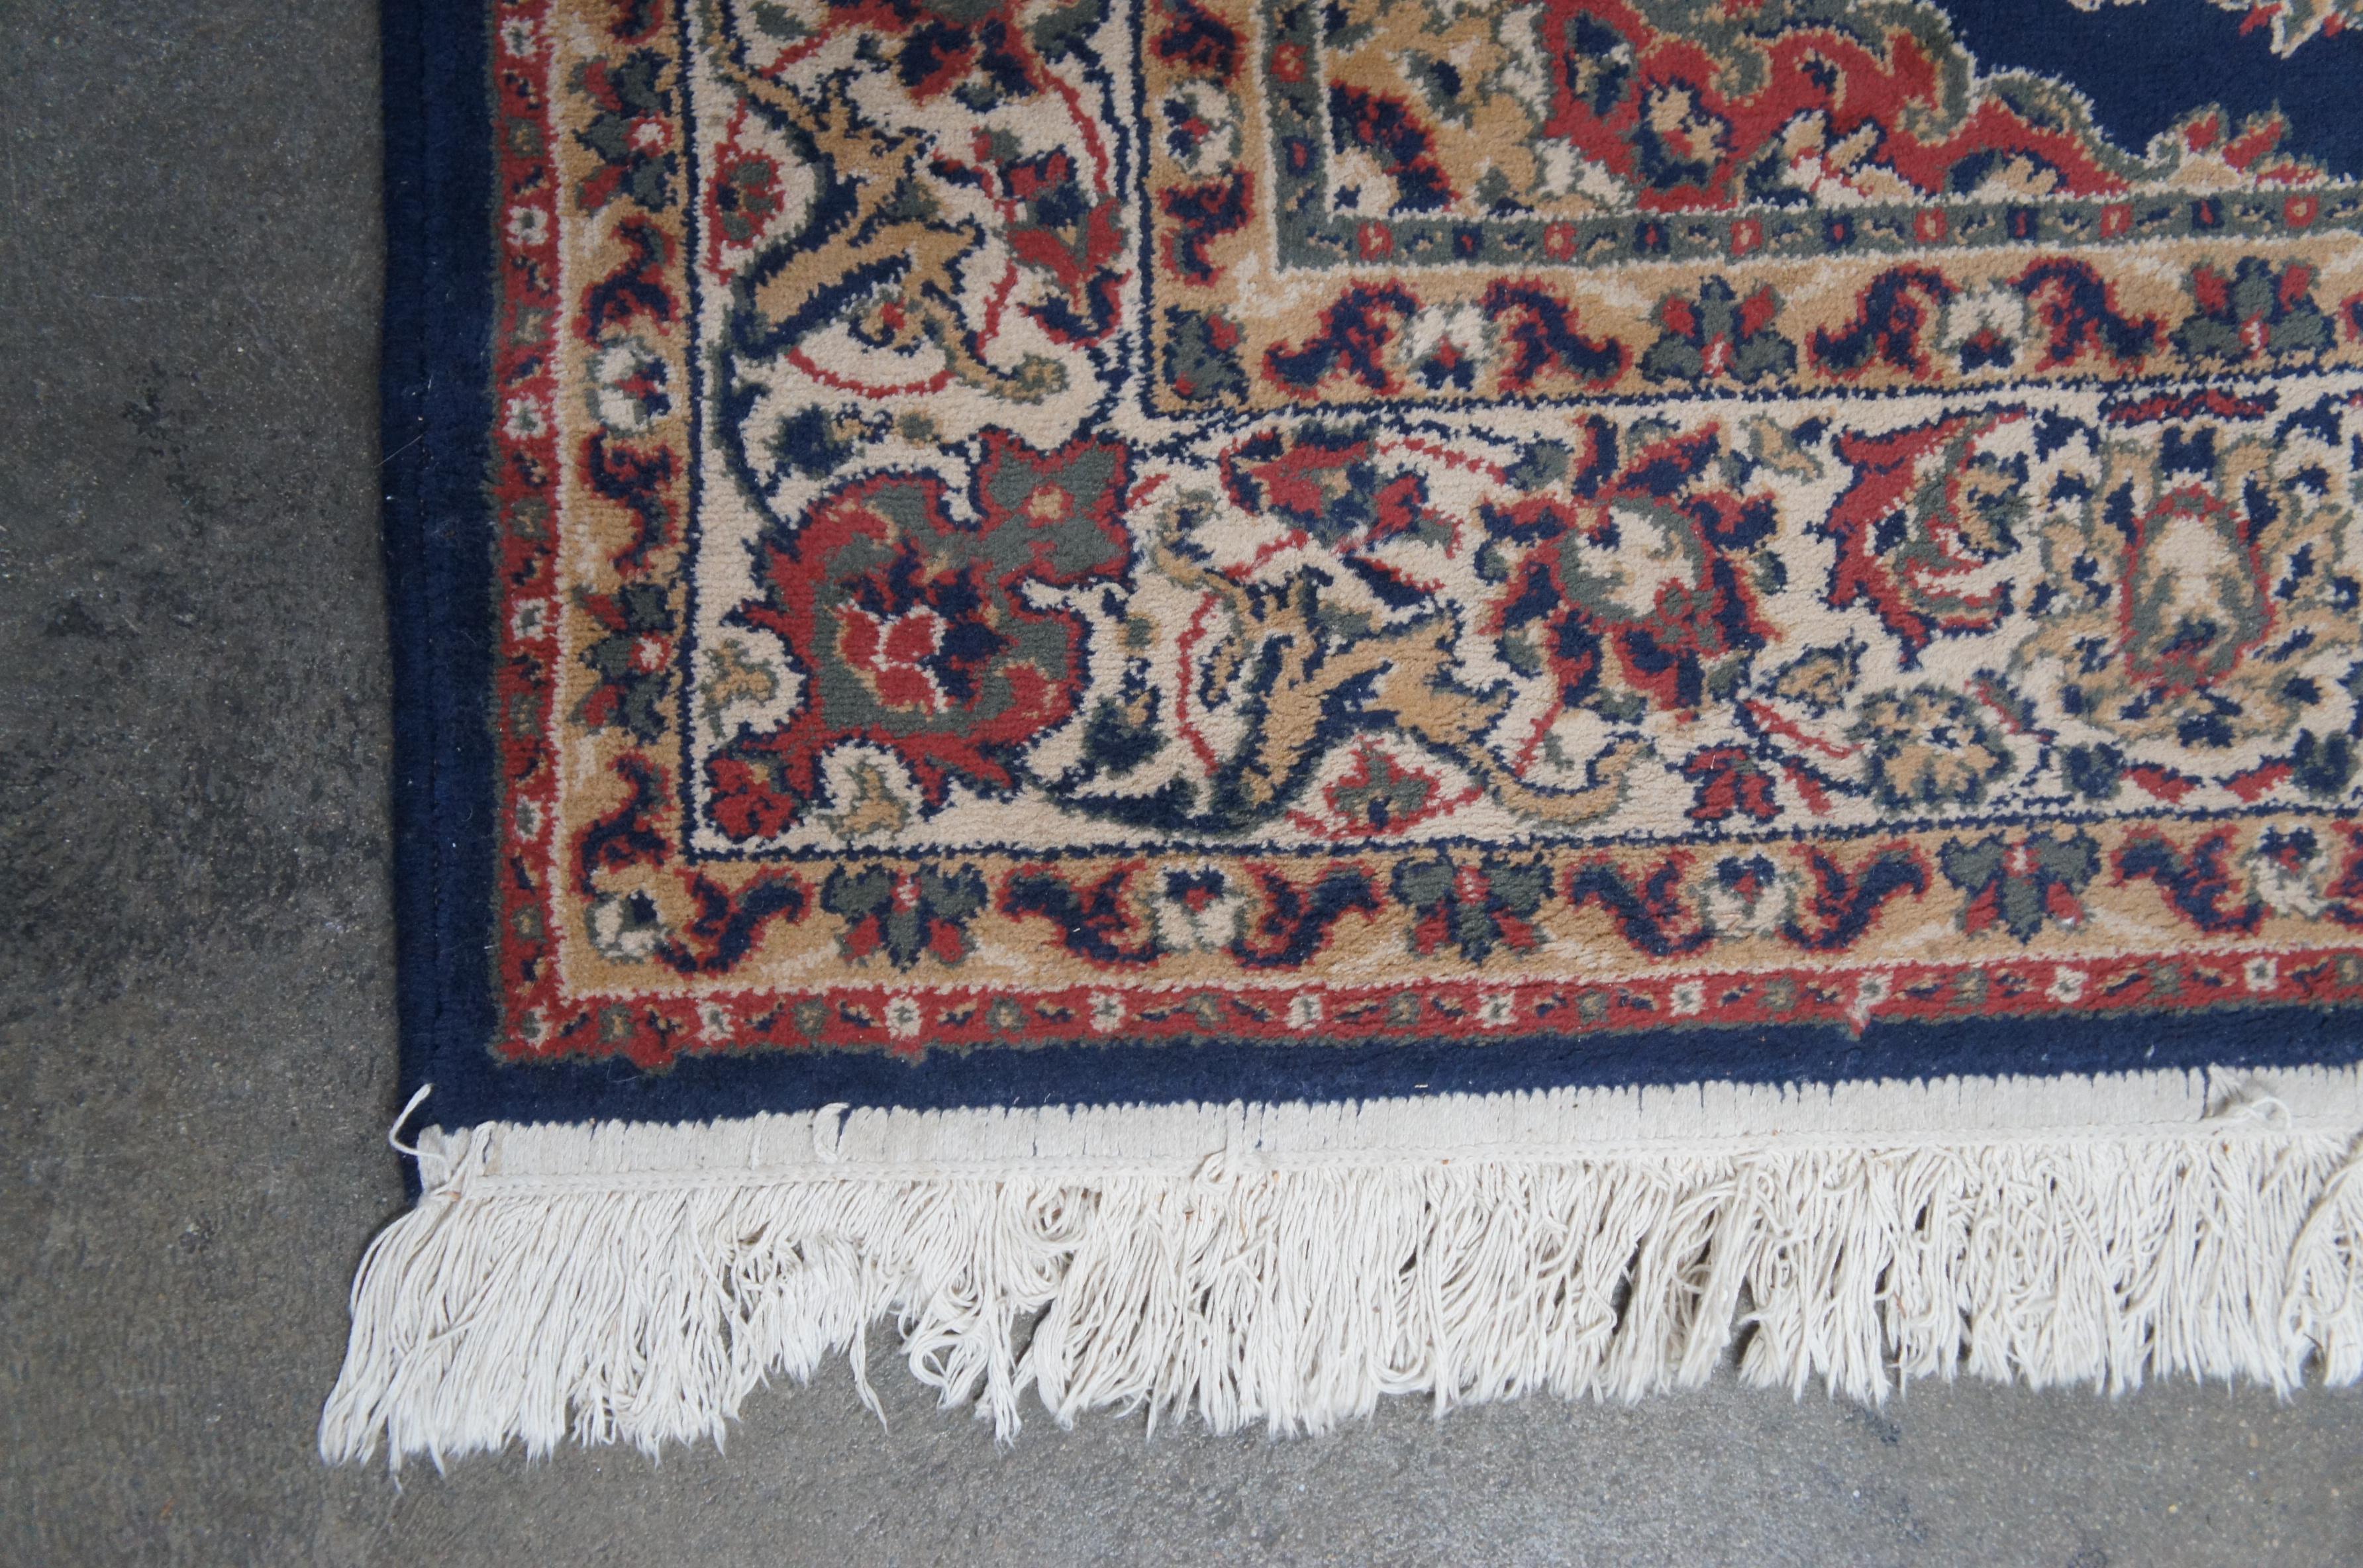 Vintage Royal Persian Sarouk Navy Floral All Over Navy Area Rug Carpet 5' x 8' In Good Condition For Sale In Dayton, OH